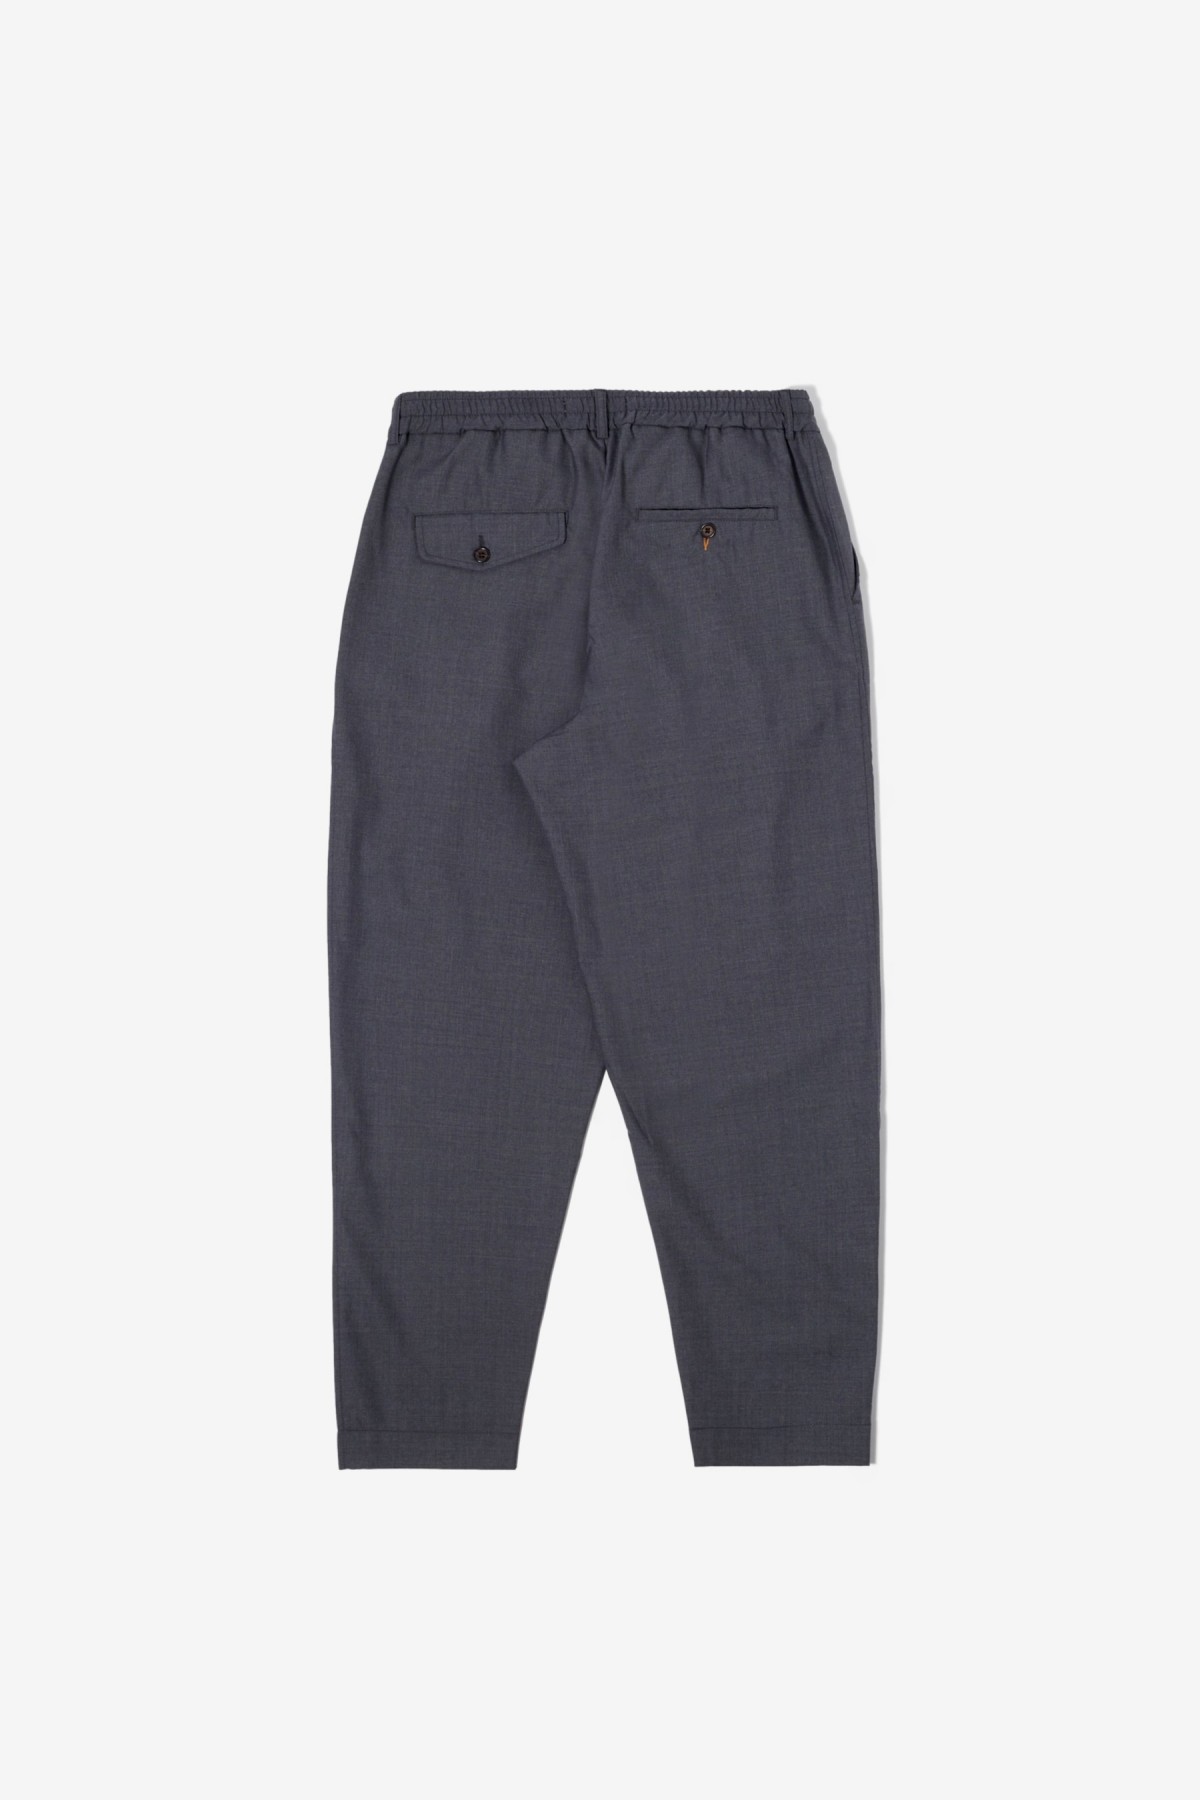 Universal Works Pleated Track Pant in Grey